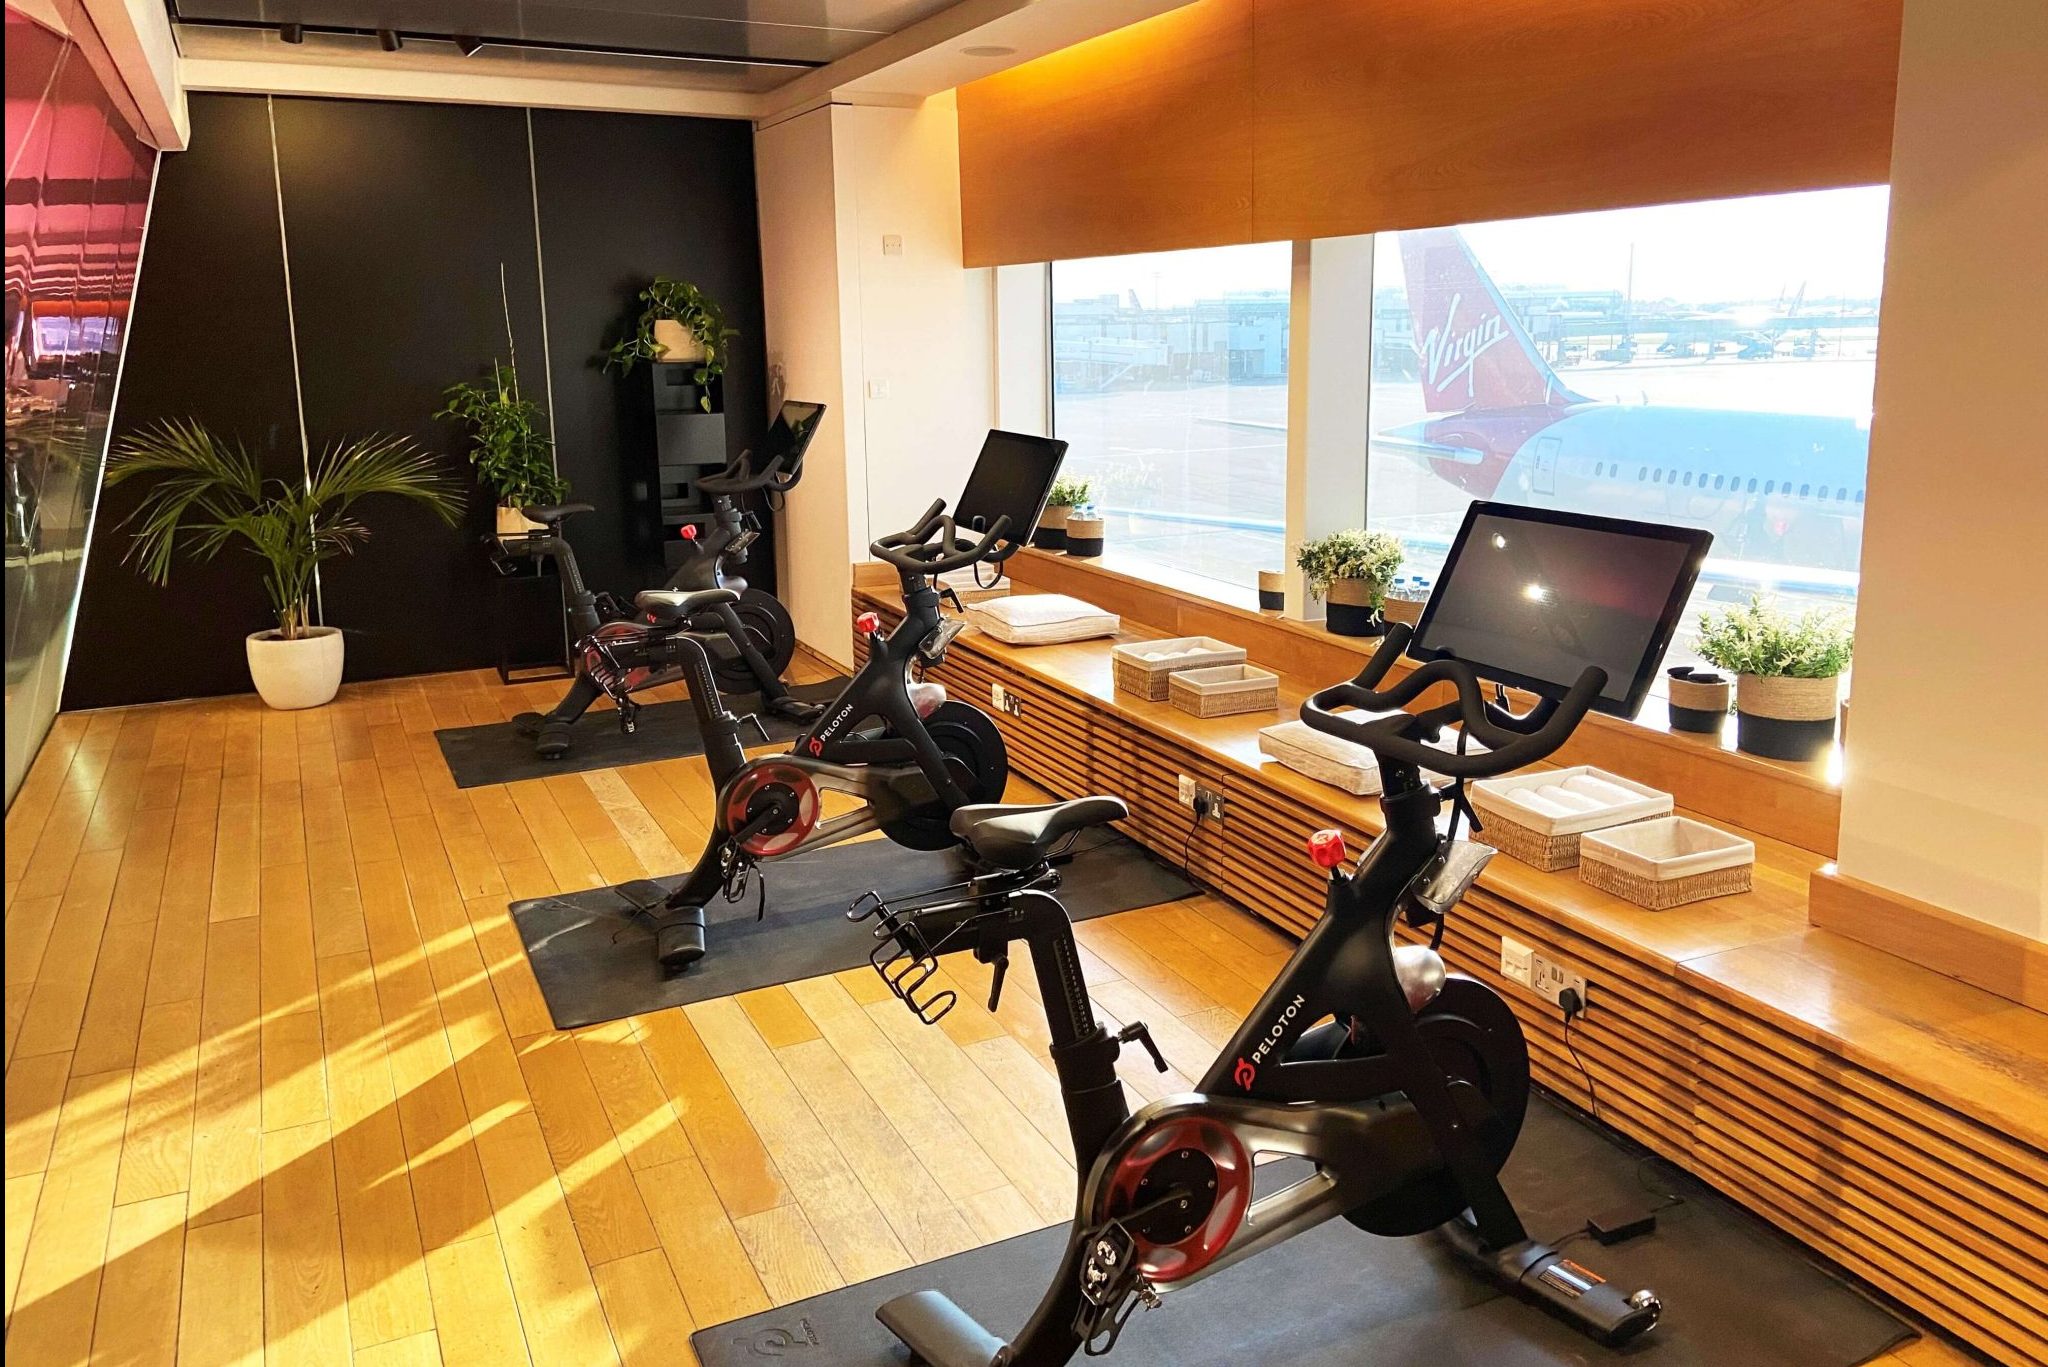 Virgin Atlantic's Clubhouse at London Heathrow offers the use of Peloton bikes.